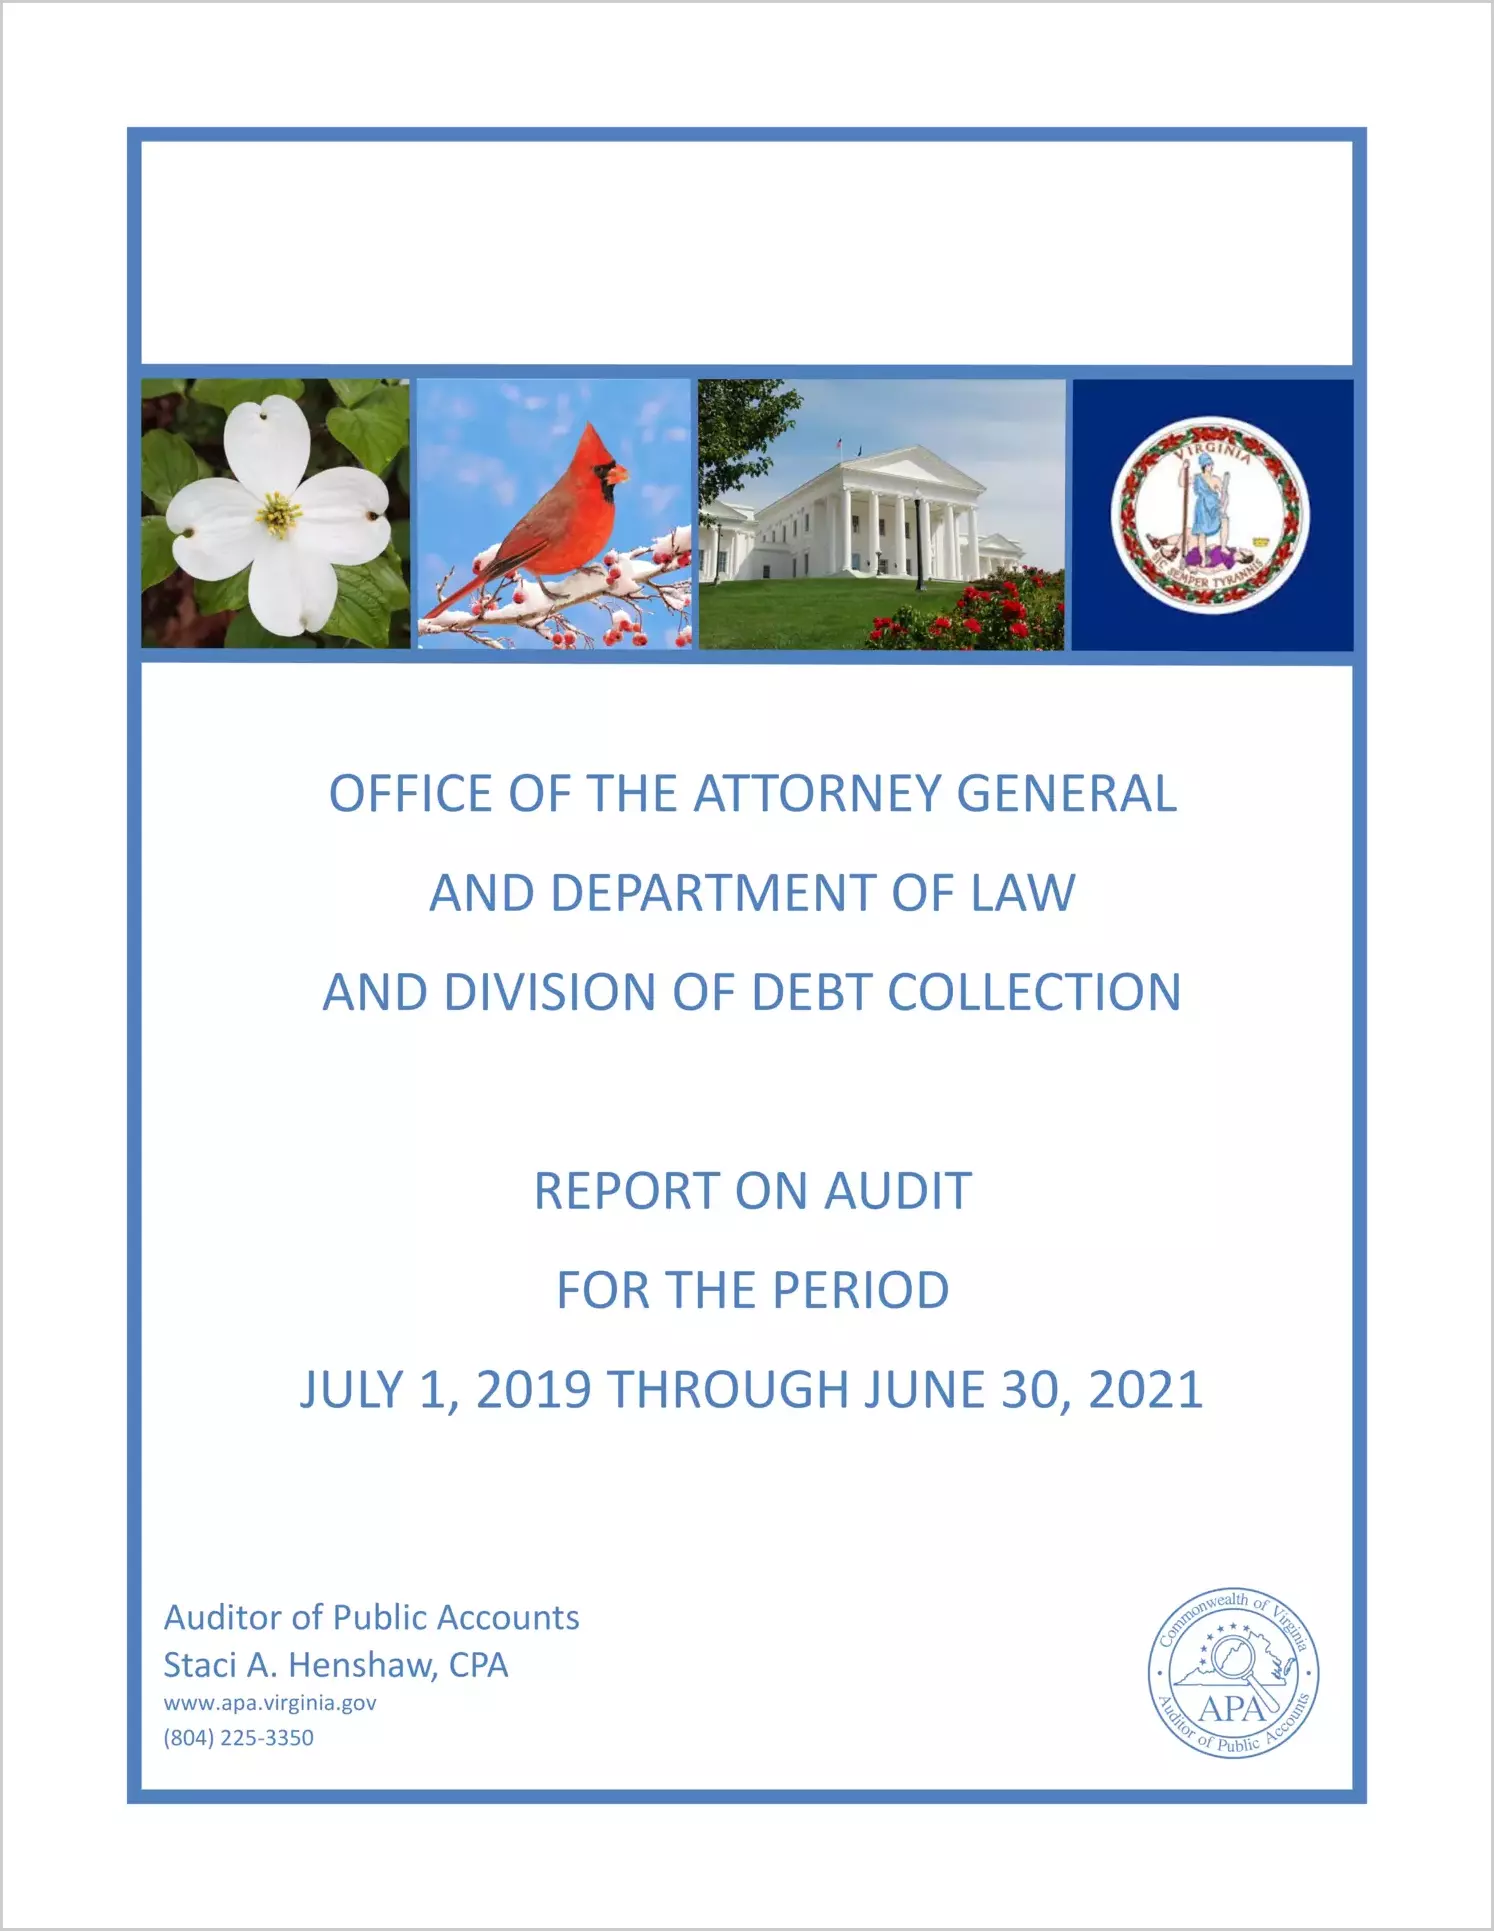 Office of the Attorney General and Department of Law and Division of Debt Collection for the period July 1, 2019 through June 30, 2021